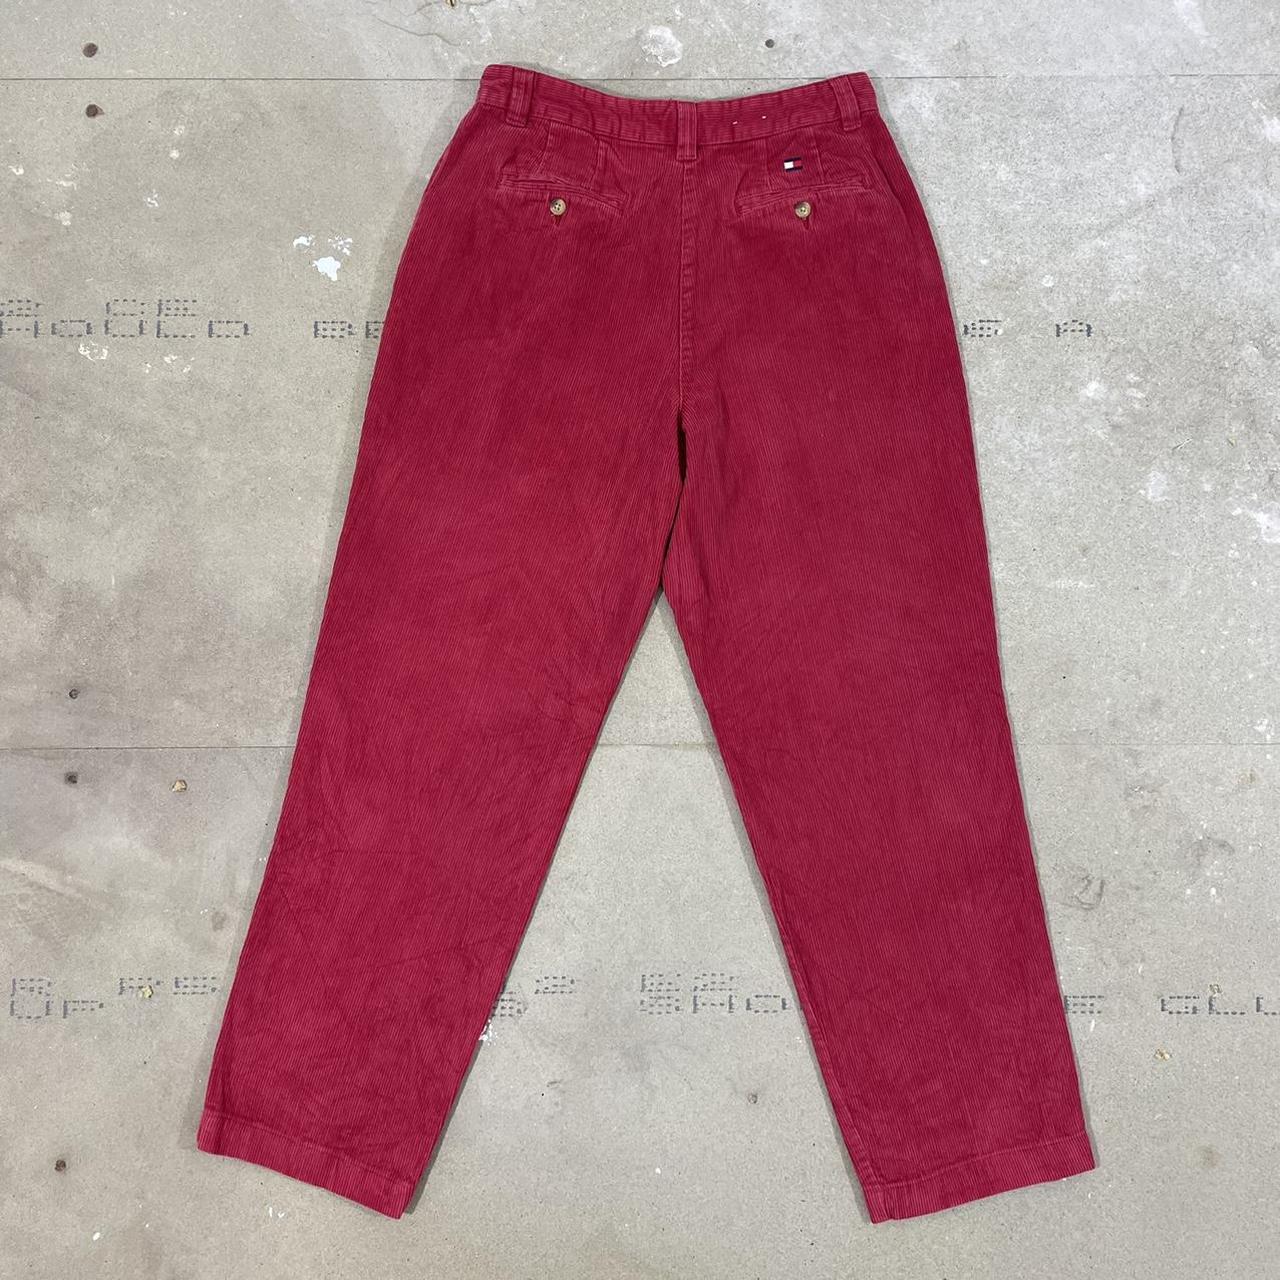 Vintage Tommy Hilfiger Corduroy Trousers🌹 •In A Red... - Depop